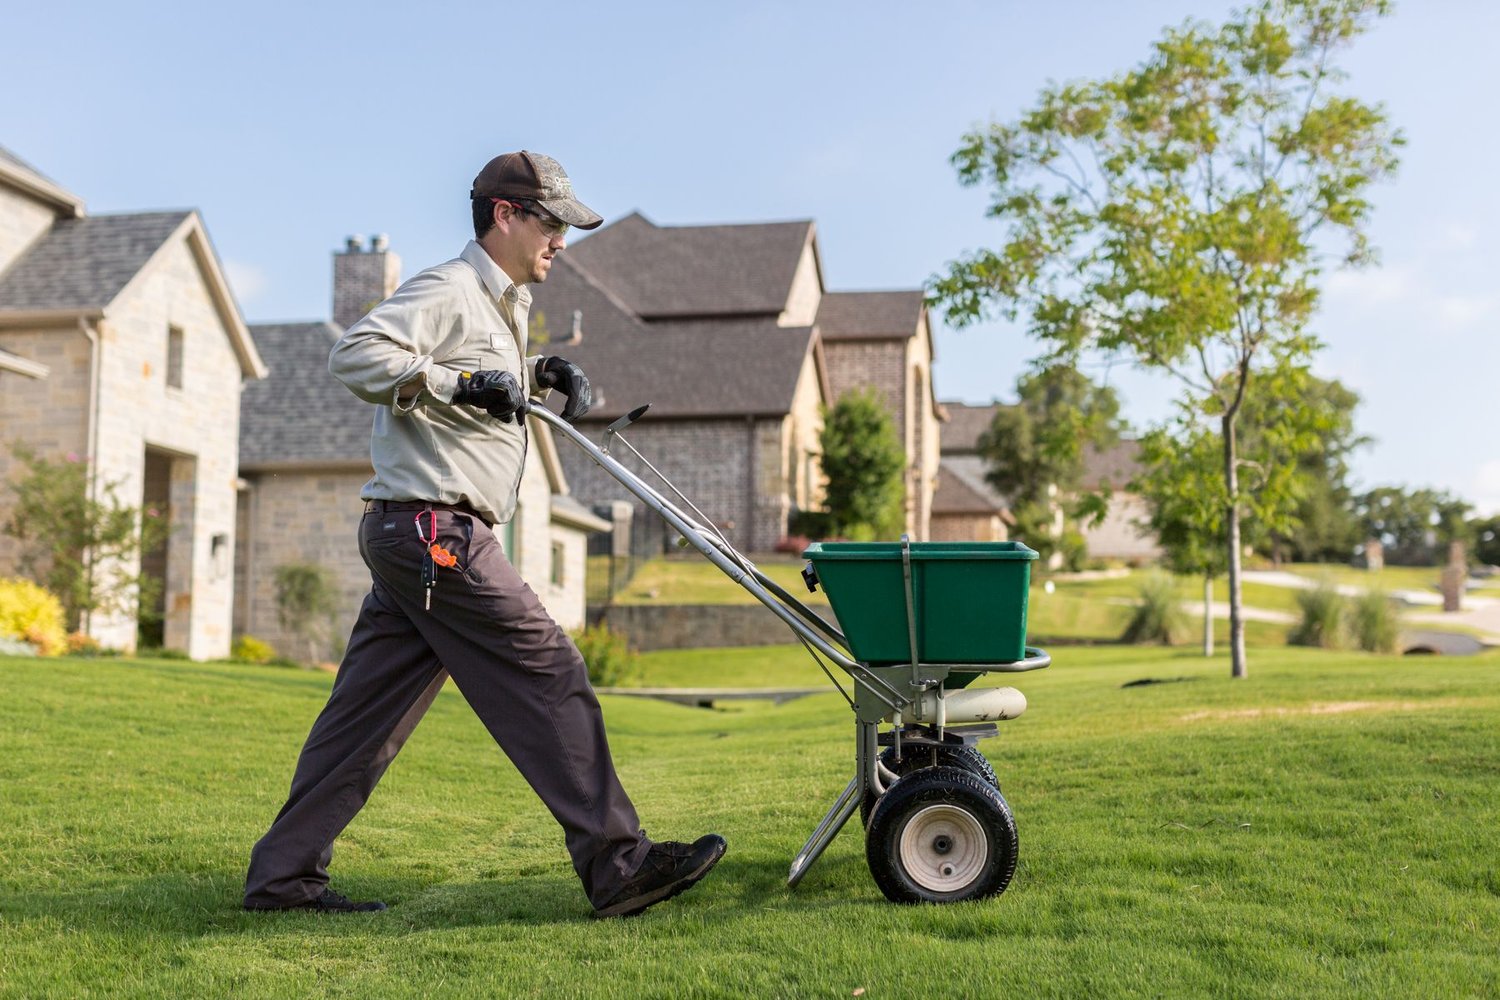 texas grass being fertilized by lawn care technician